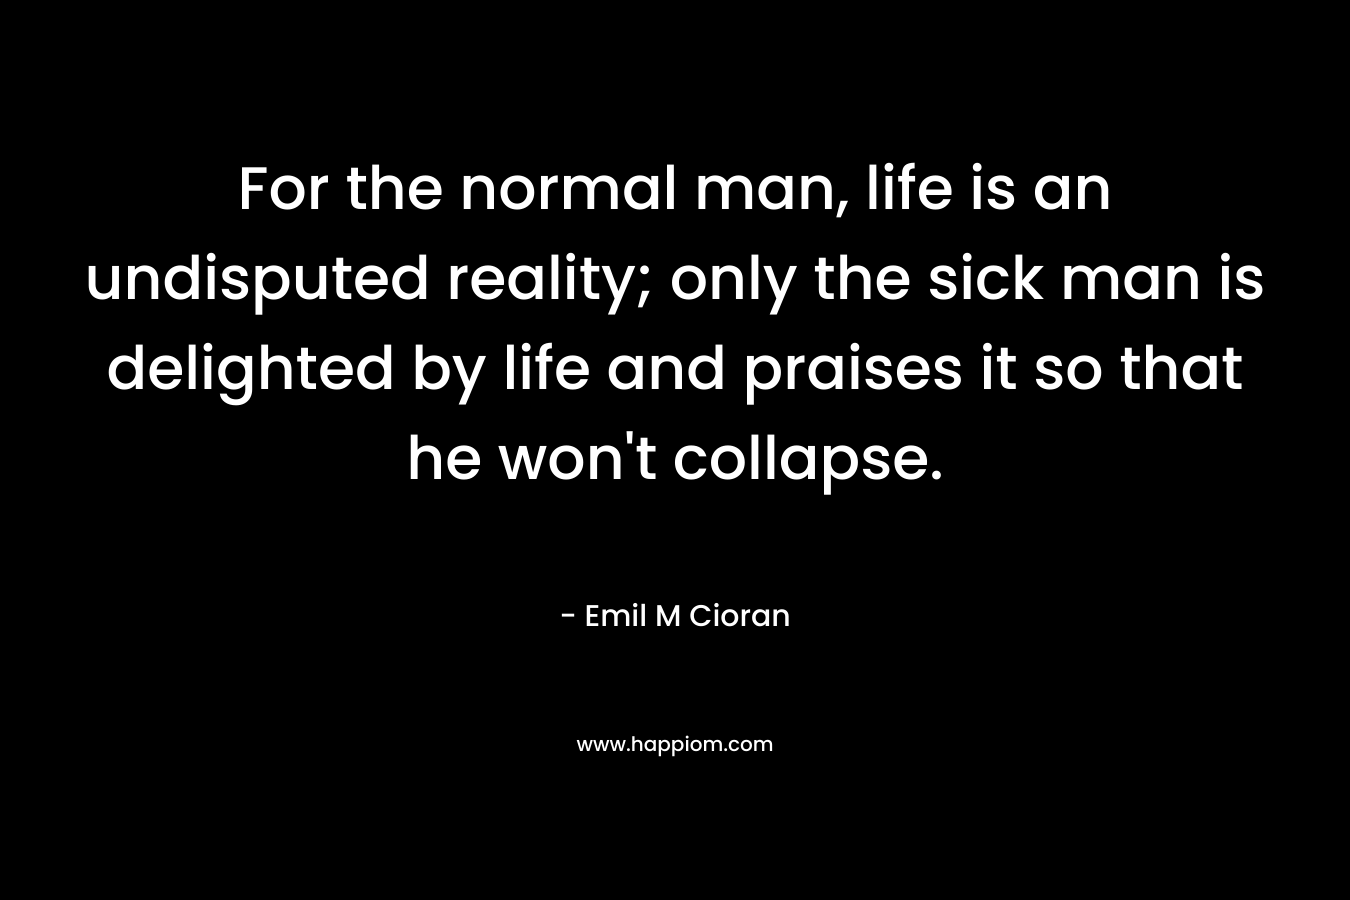 For the normal man, life is an undisputed reality; only the sick man is delighted by life and praises it so that he won't collapse.